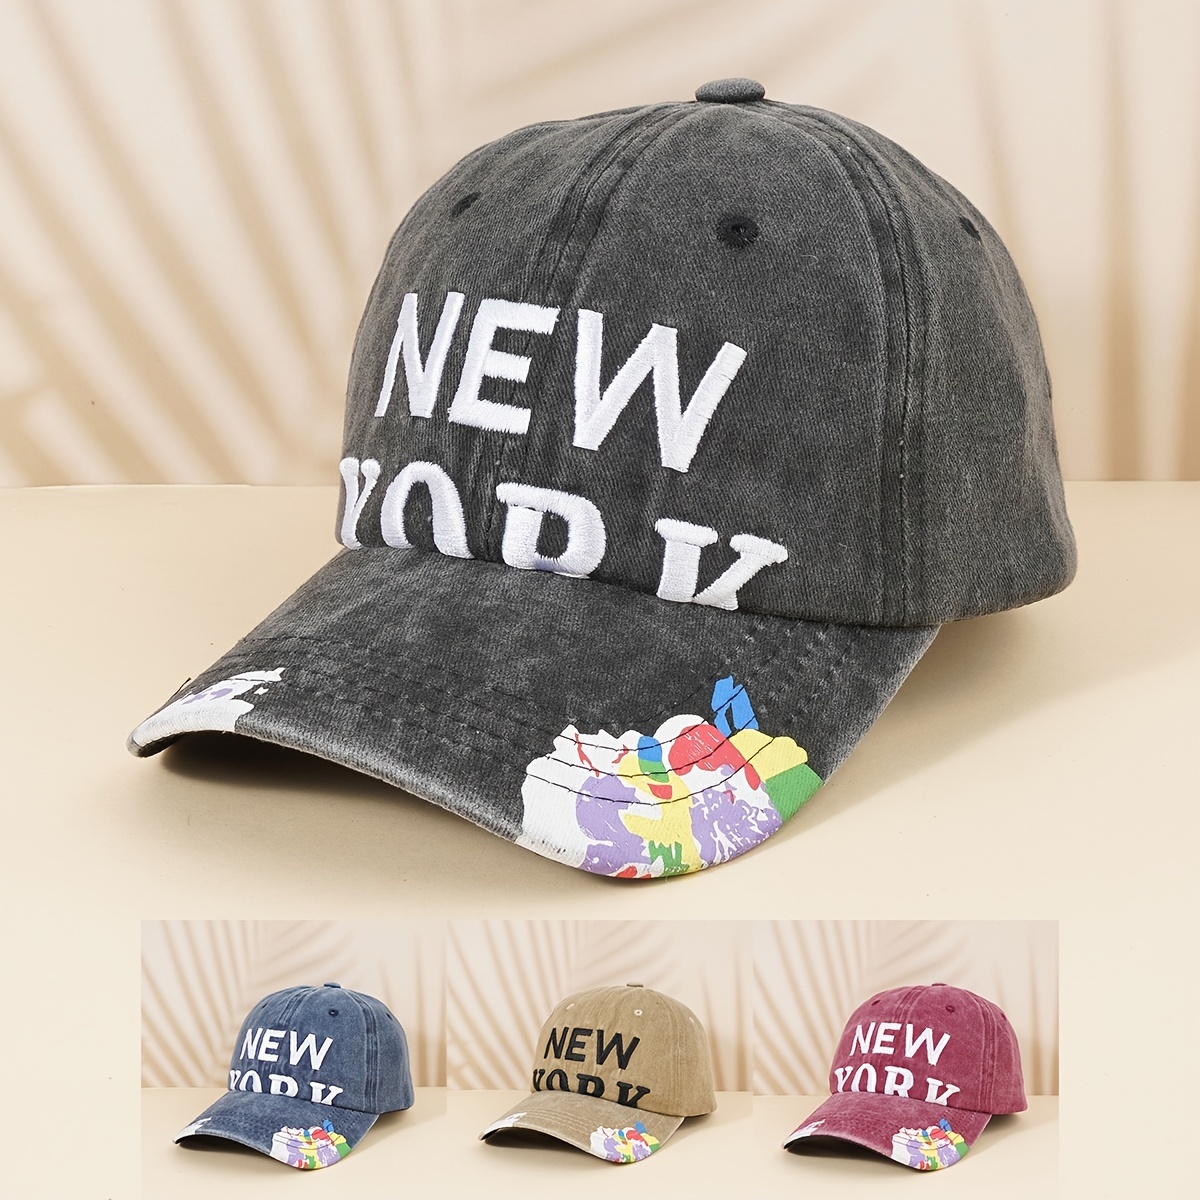 New York Flat Brim Fitted Baseball Cap NY Embroidered Hip Hop Hat